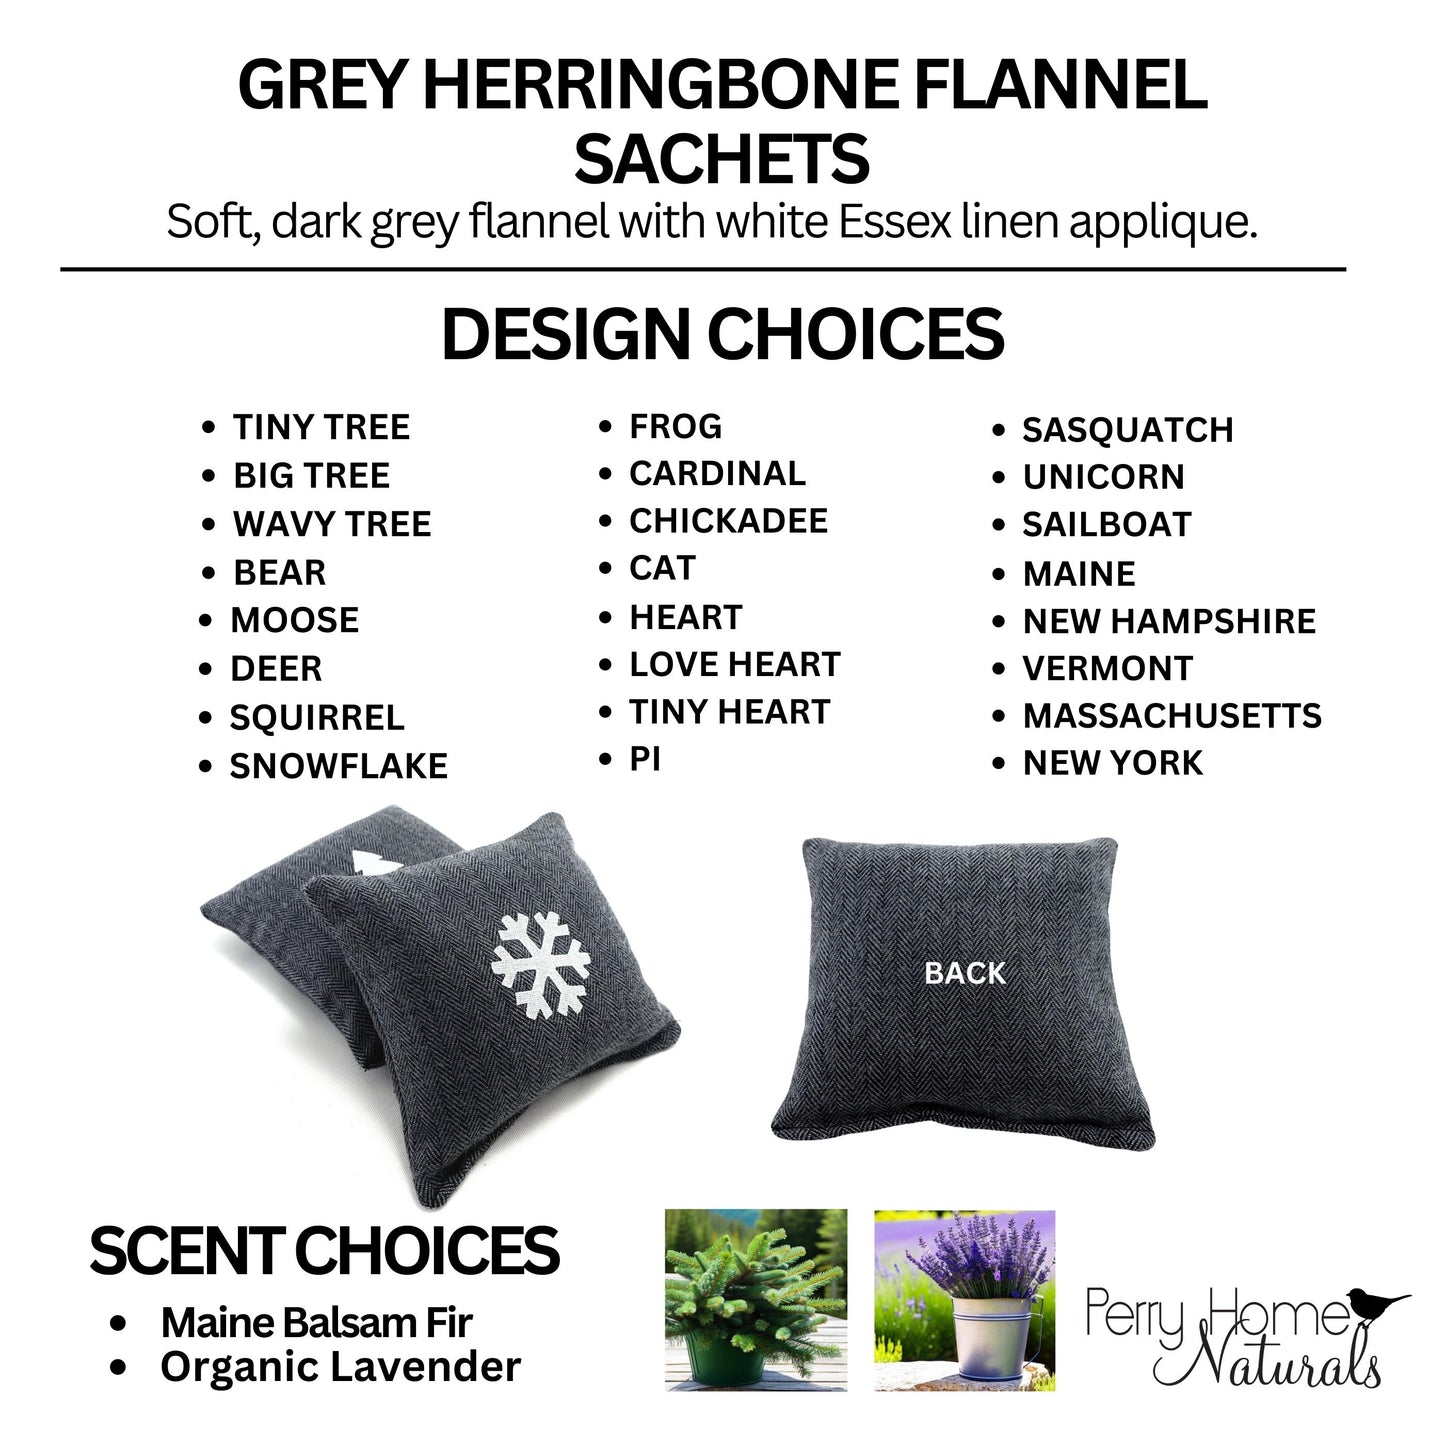 Specialty Sachets in Grey Herringbone Flannel- Choice of Design & Scent